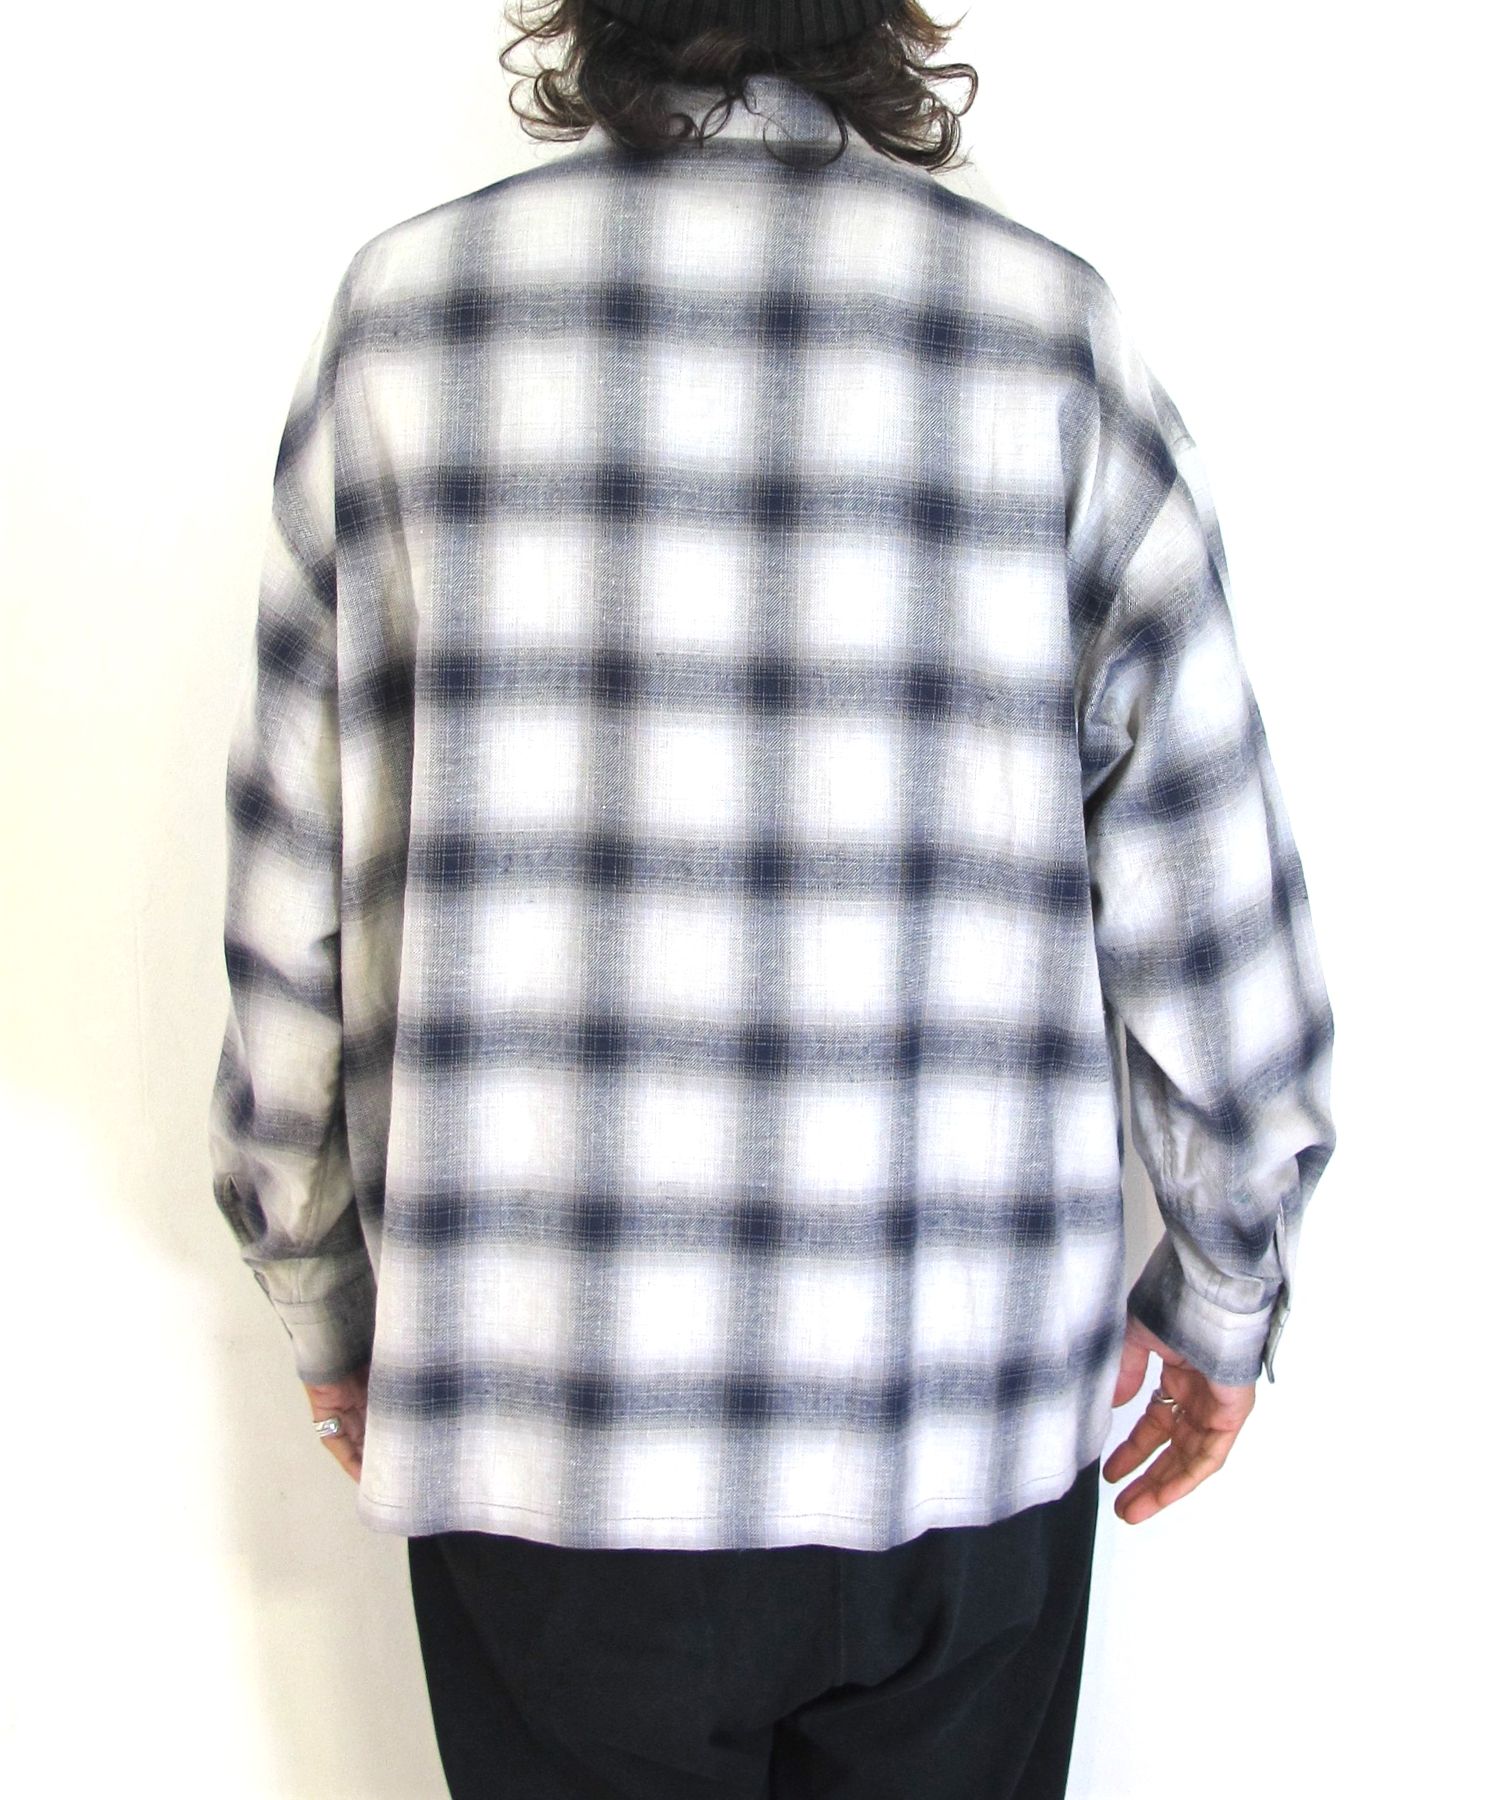 ROTTWEILER - OMBRE CHECK SHIRTS (NAVY) / オンブレチェックオープン 